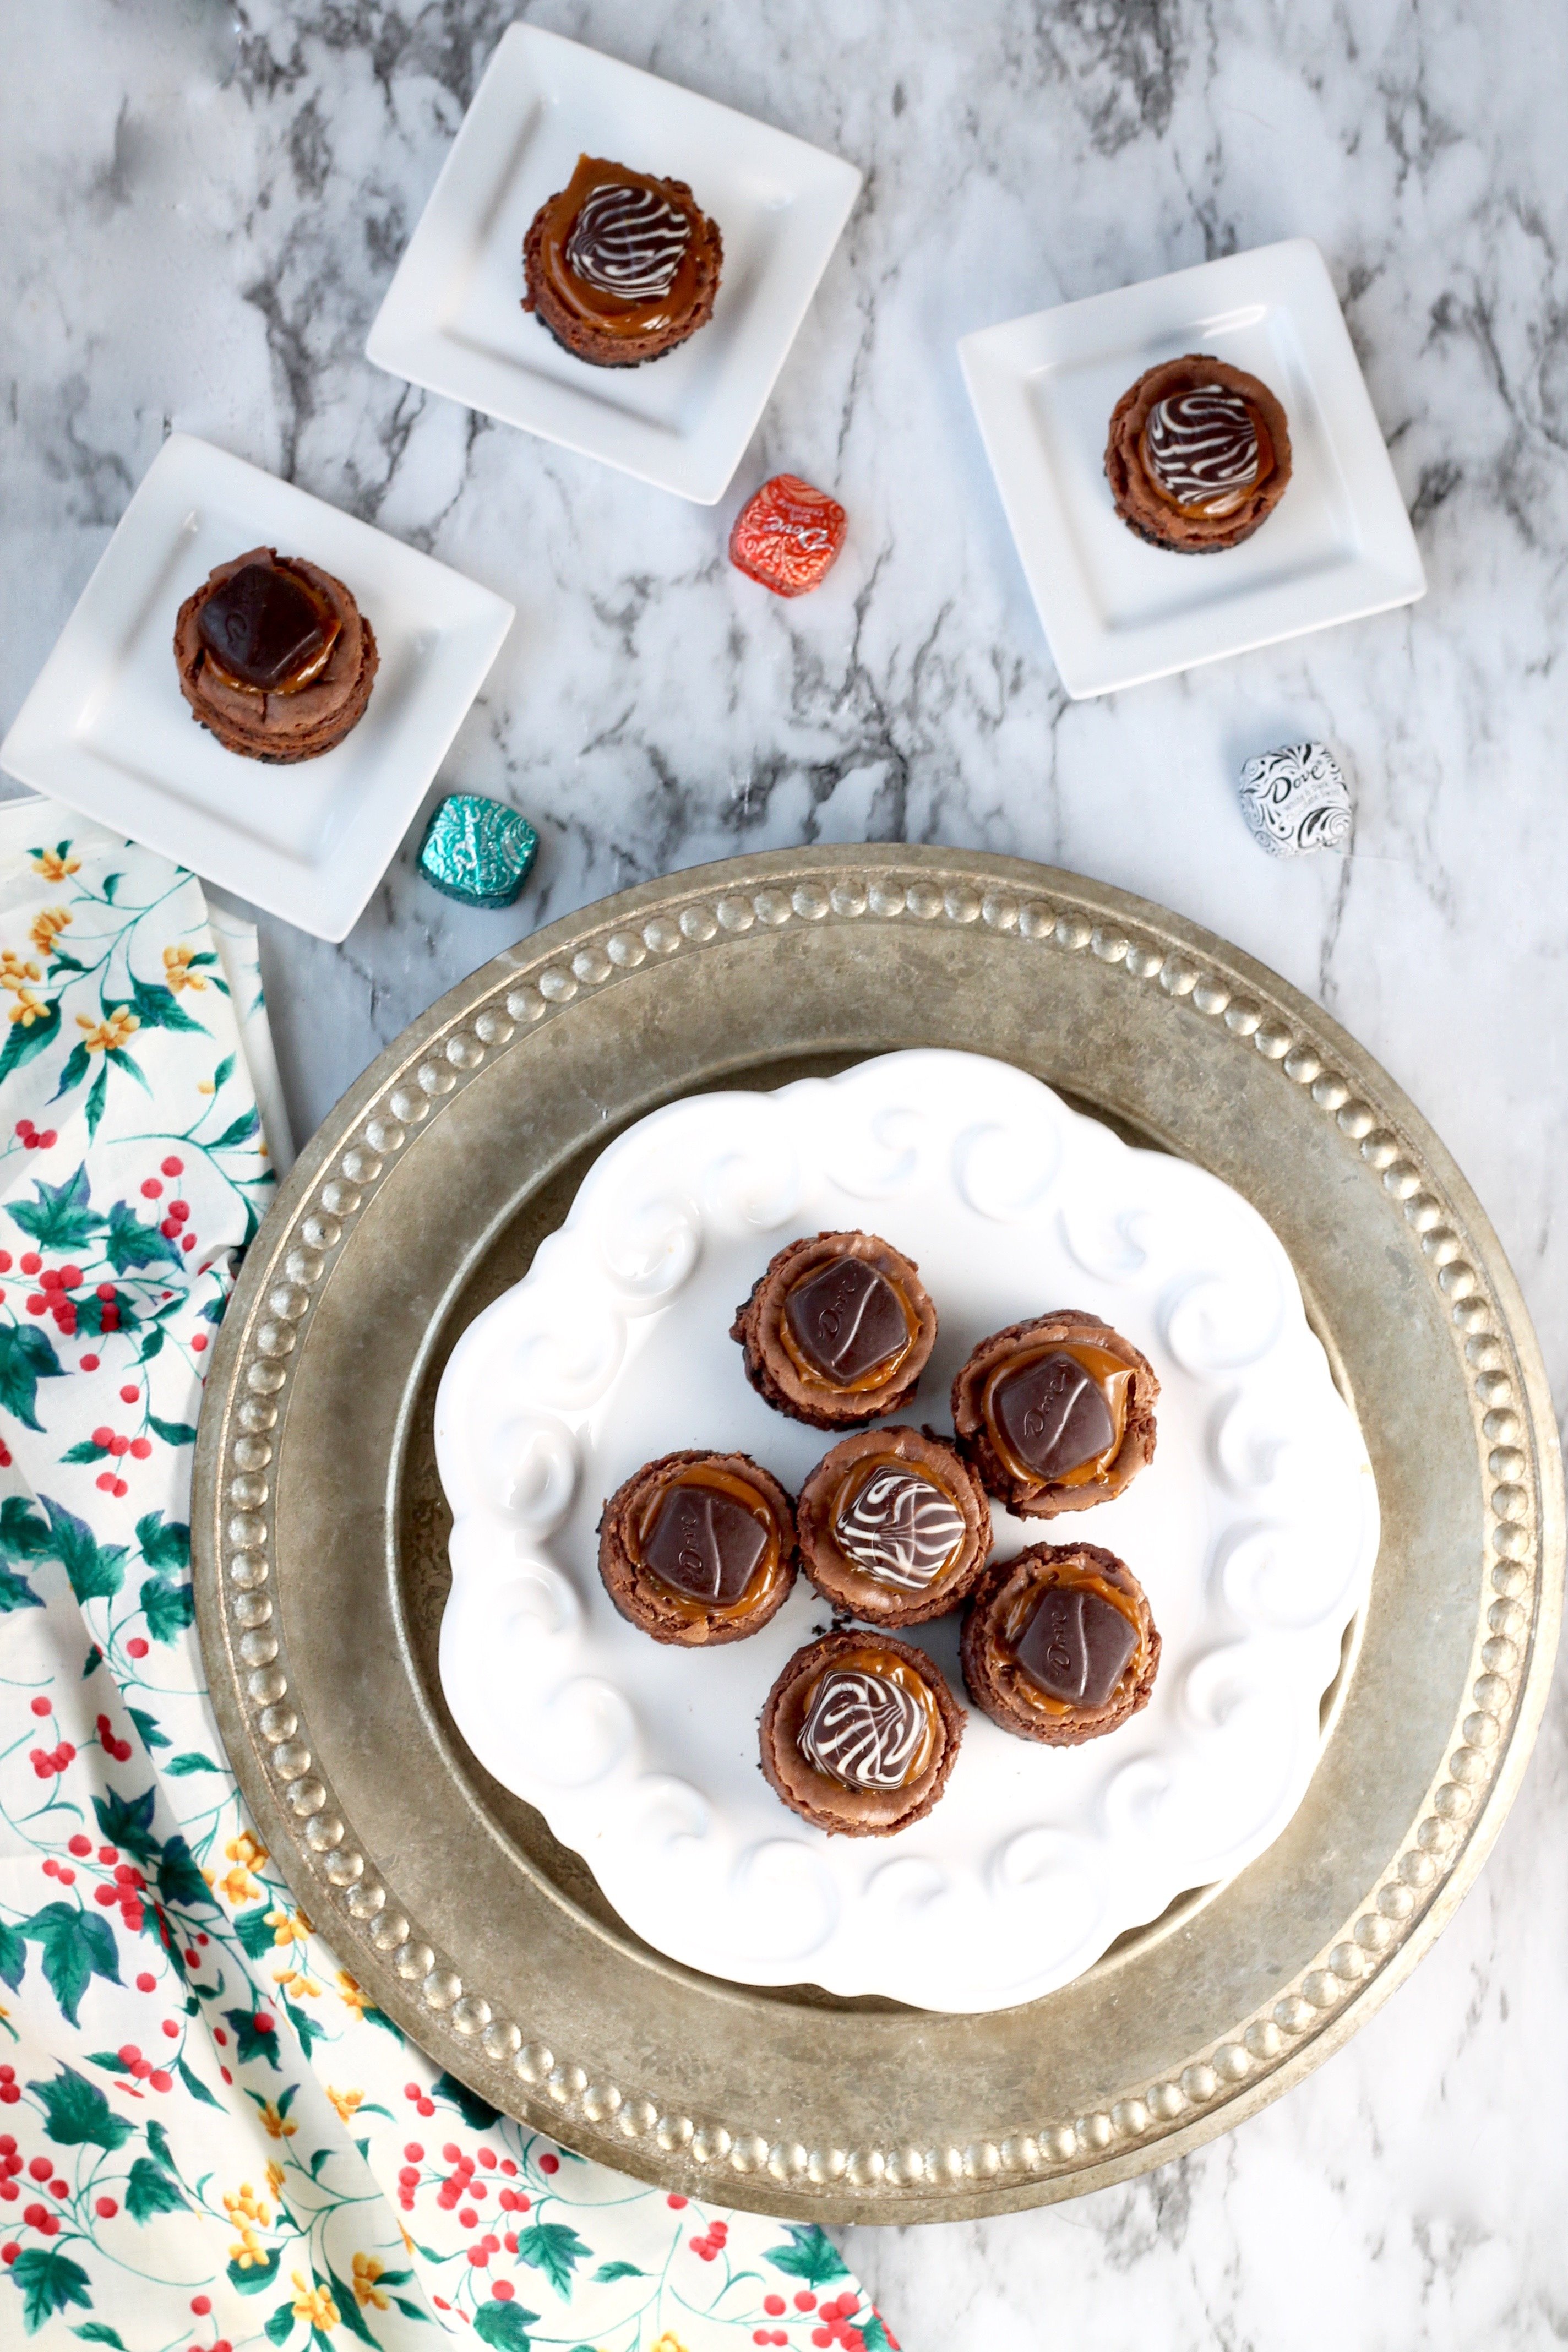 Mini Chocolate Cheesecakes with Dove Chocolates and Dulce De Leche Caramel